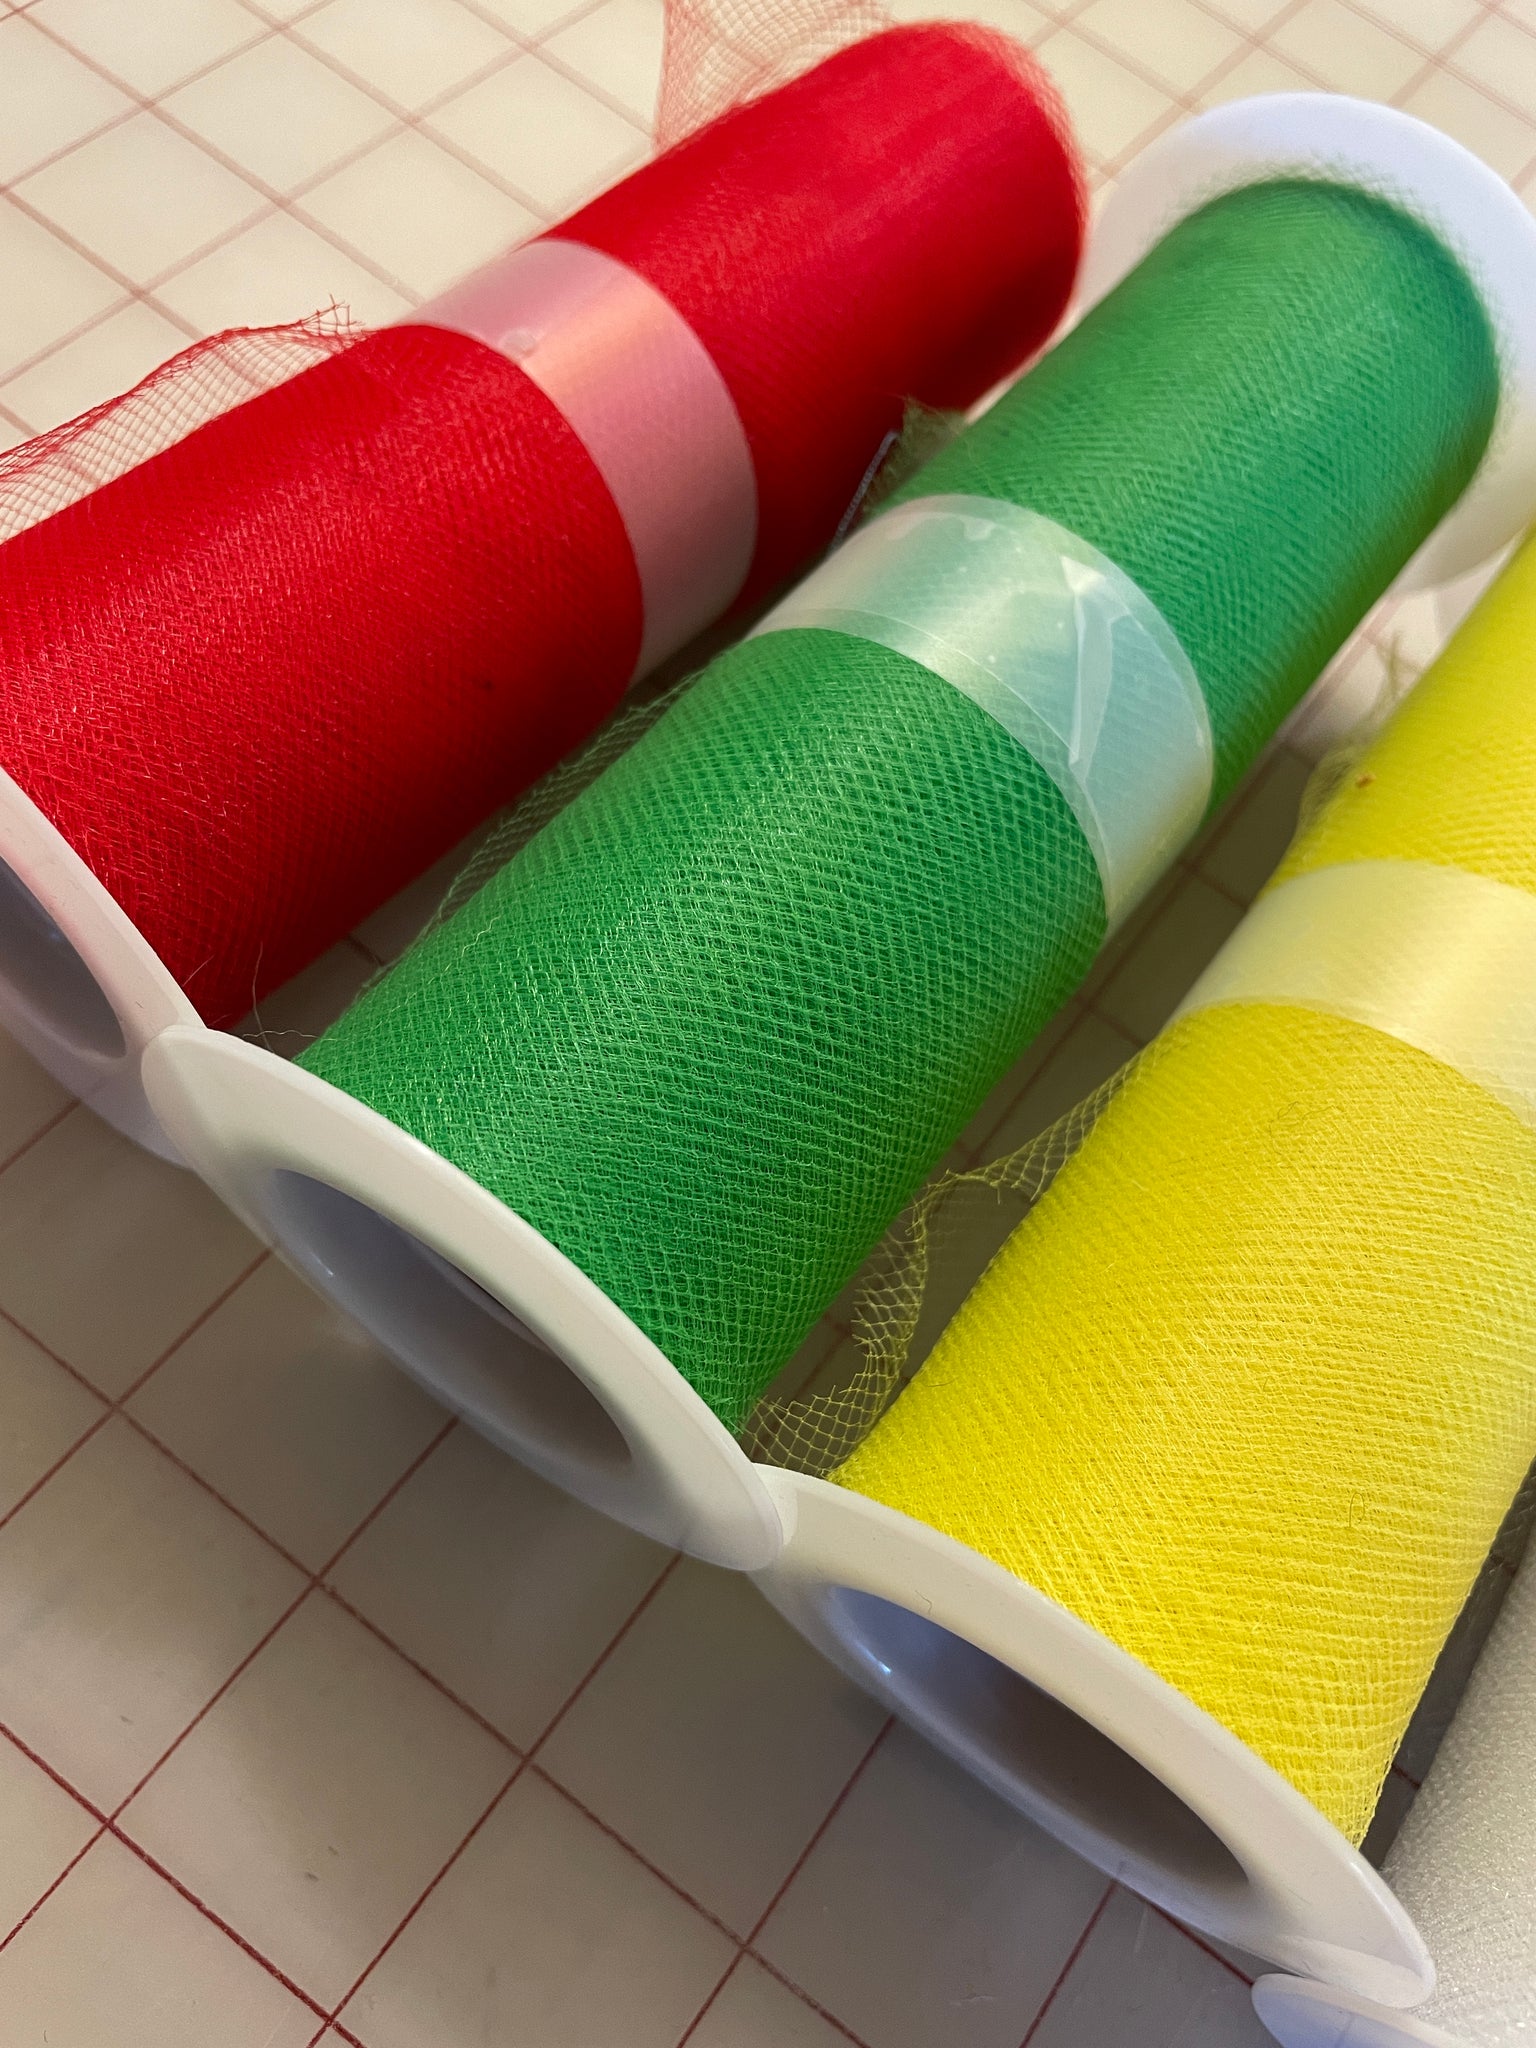 SALE Spools of Tulle Bundle - Red, Green, Yellow and White